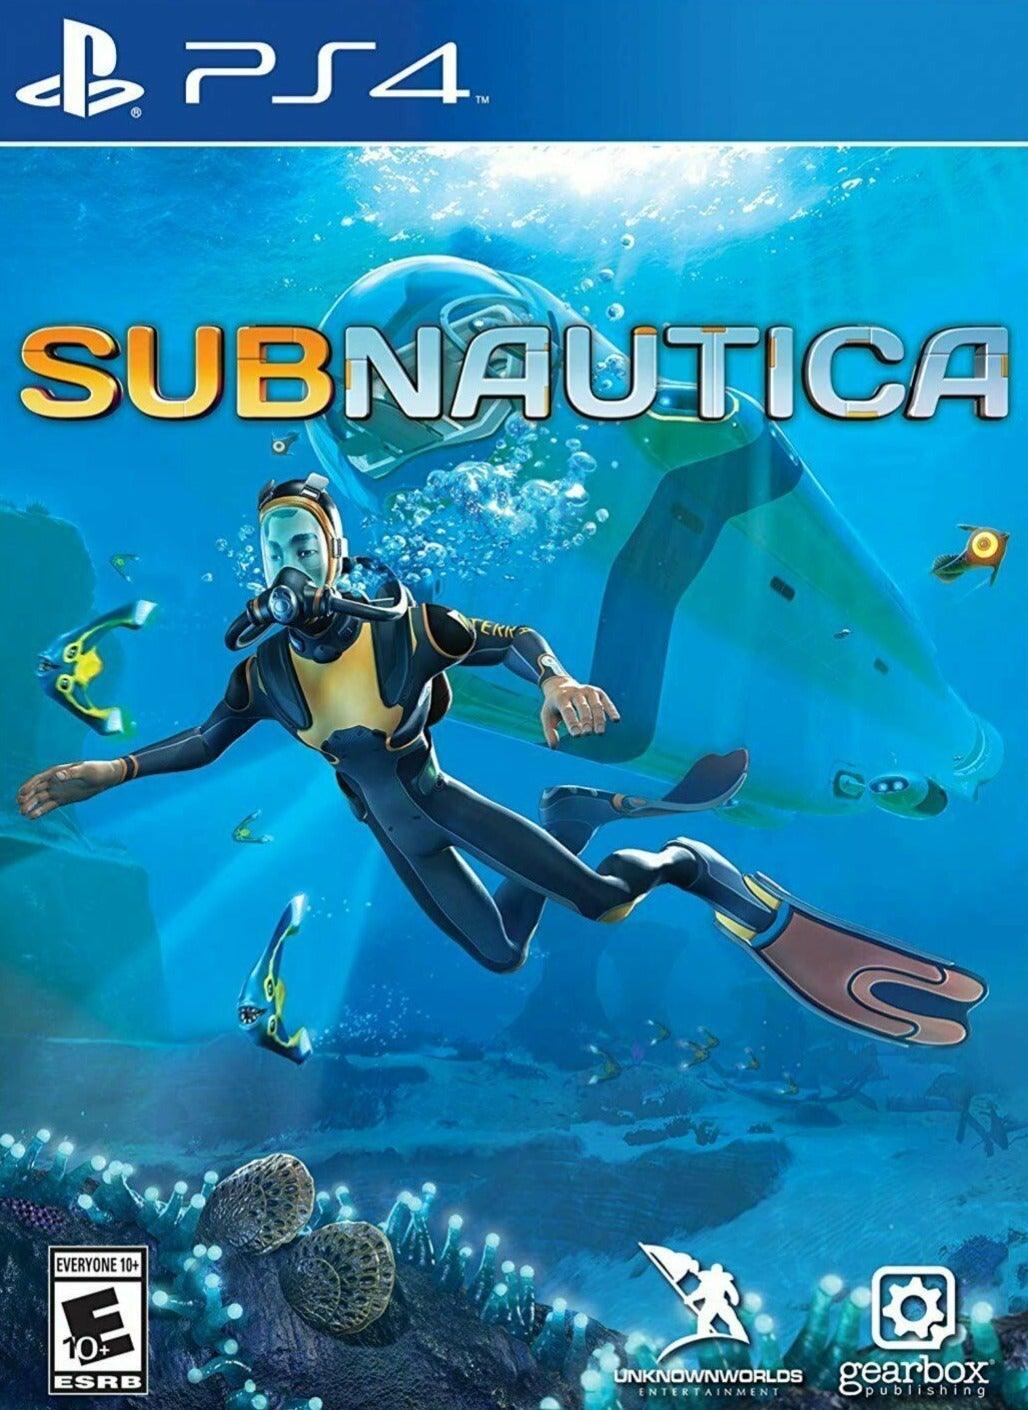 Subnautica / PS4 / Playstation 4 - GD Games 